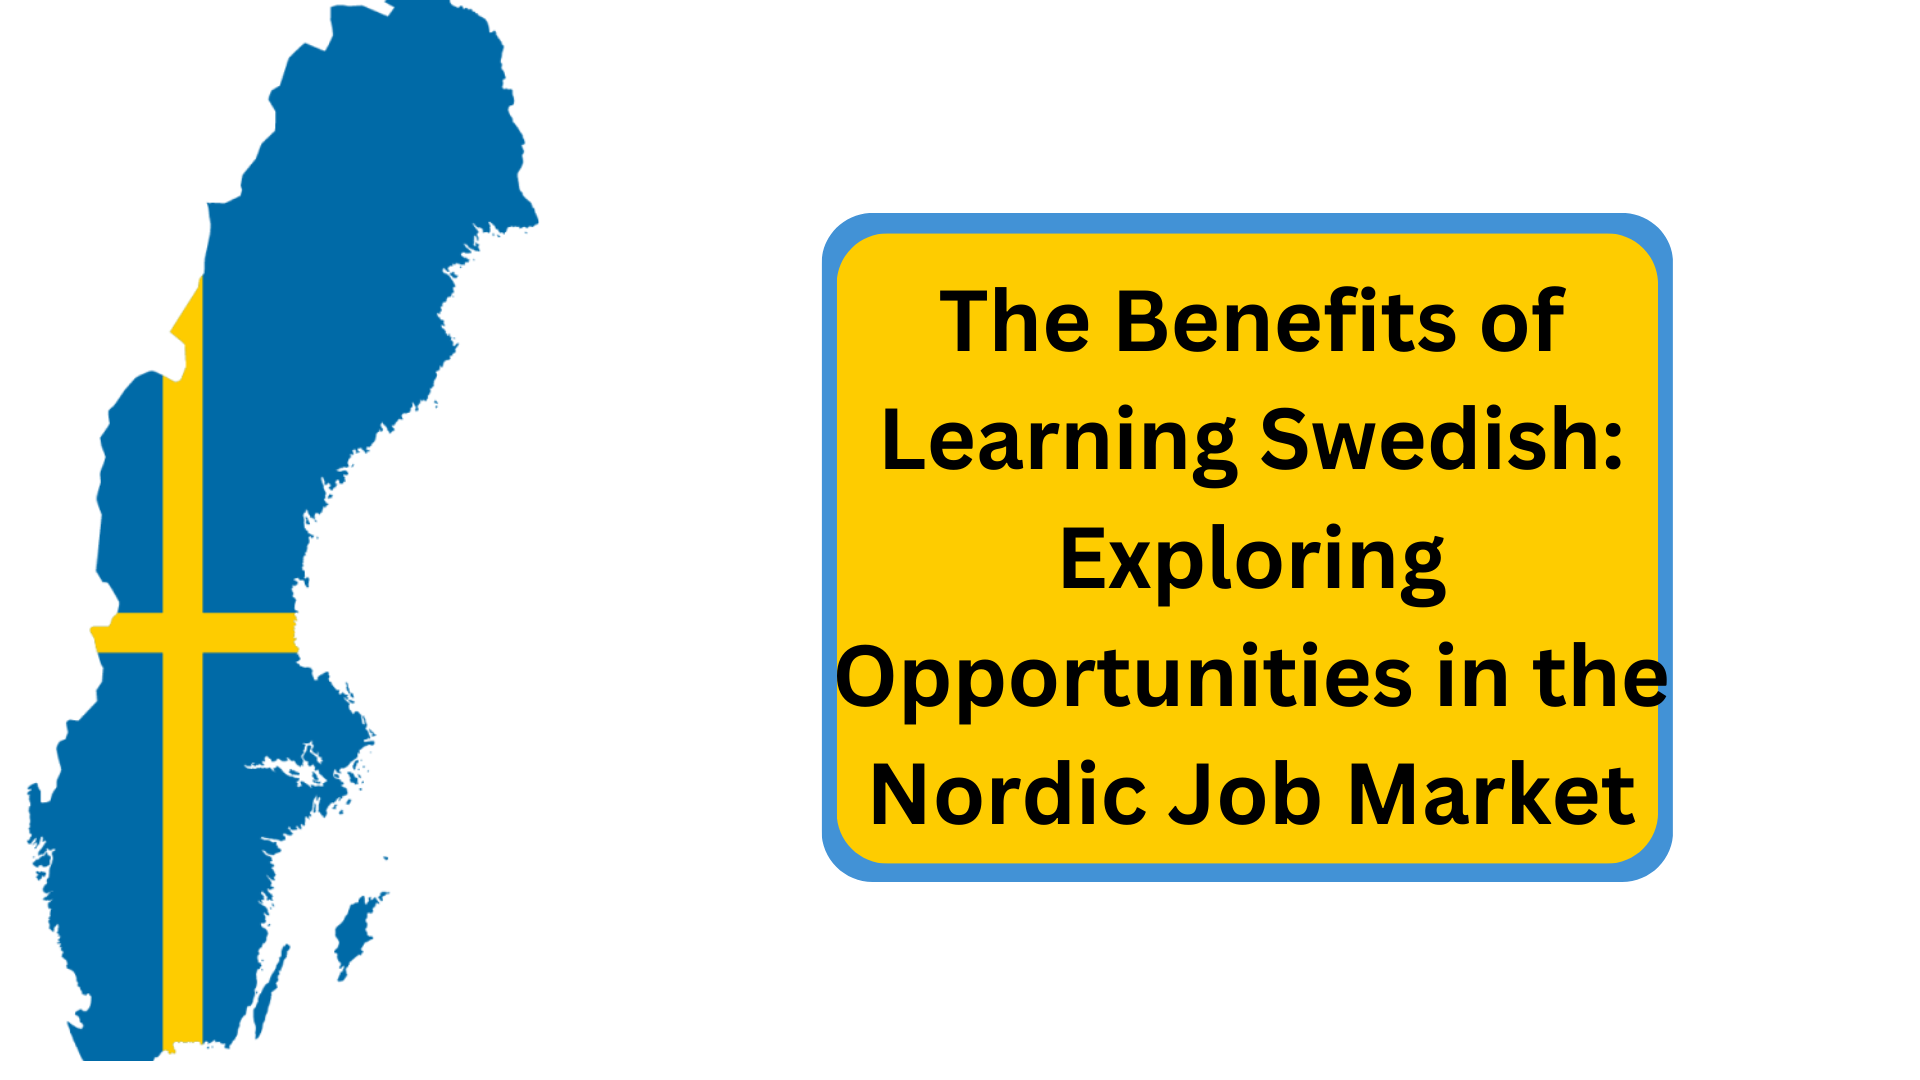 The Benefits of Learning Swedish: Exploring Opportunities in the Nordic Job Market